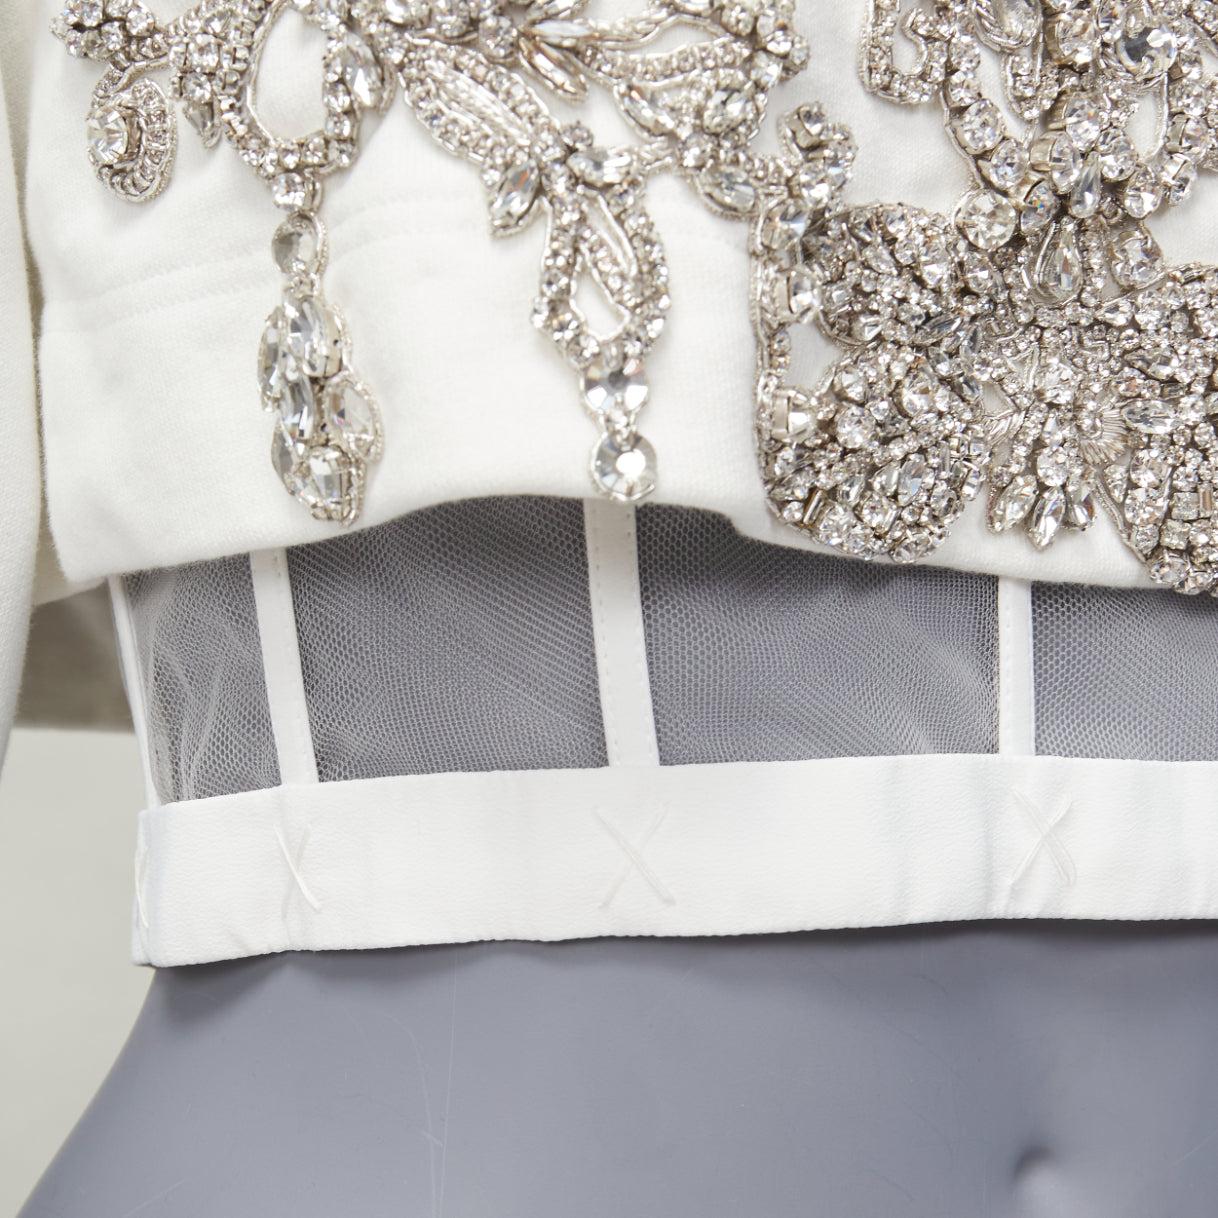 ALEXANDER MCQUEEN 2022 Runway white rhinestone crystal sheer corset crop sweater IT40 S
Reference: AAWC/A00800
Brand: Alexander McQueen
Designer: Sarah Burton
Collection: 2022 Spring Summer - Runway
Material: Cotton, Polyamide, Blend
Color: White,